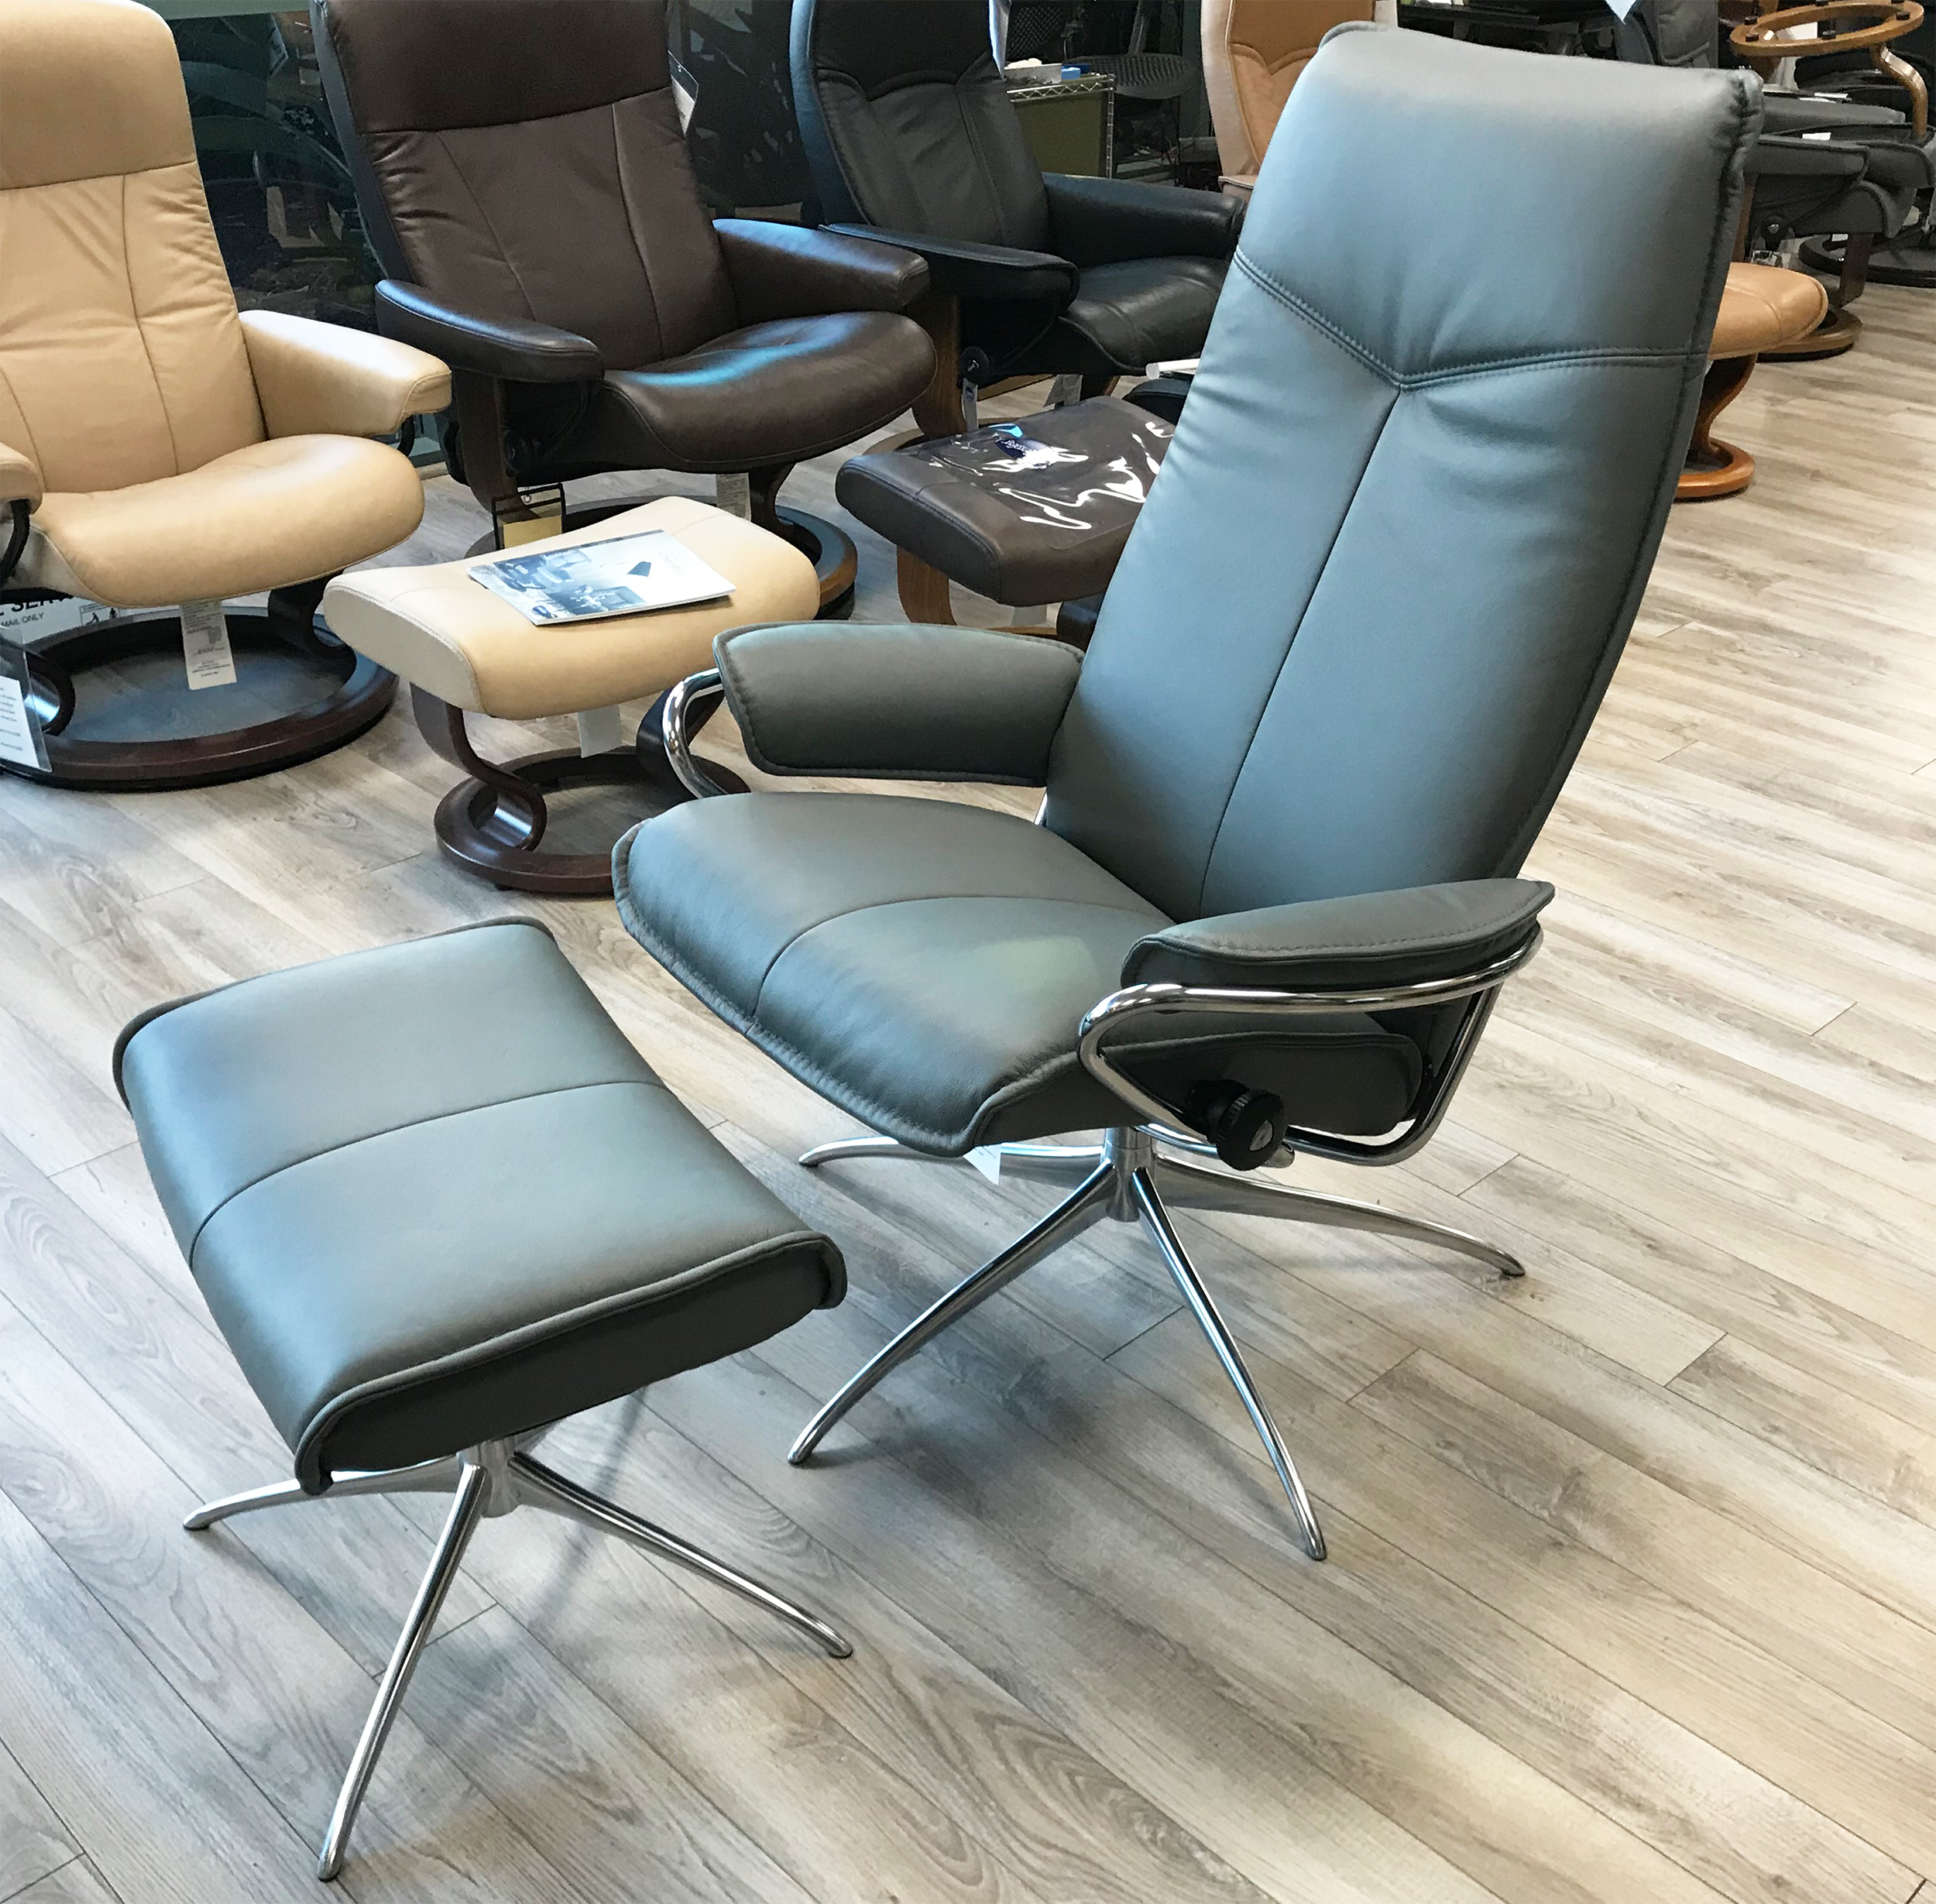 Stressless City High Back Batick Grey Leather by Ekornes - Stressless City  High Back Batick Grey Leather Chairs Recliners